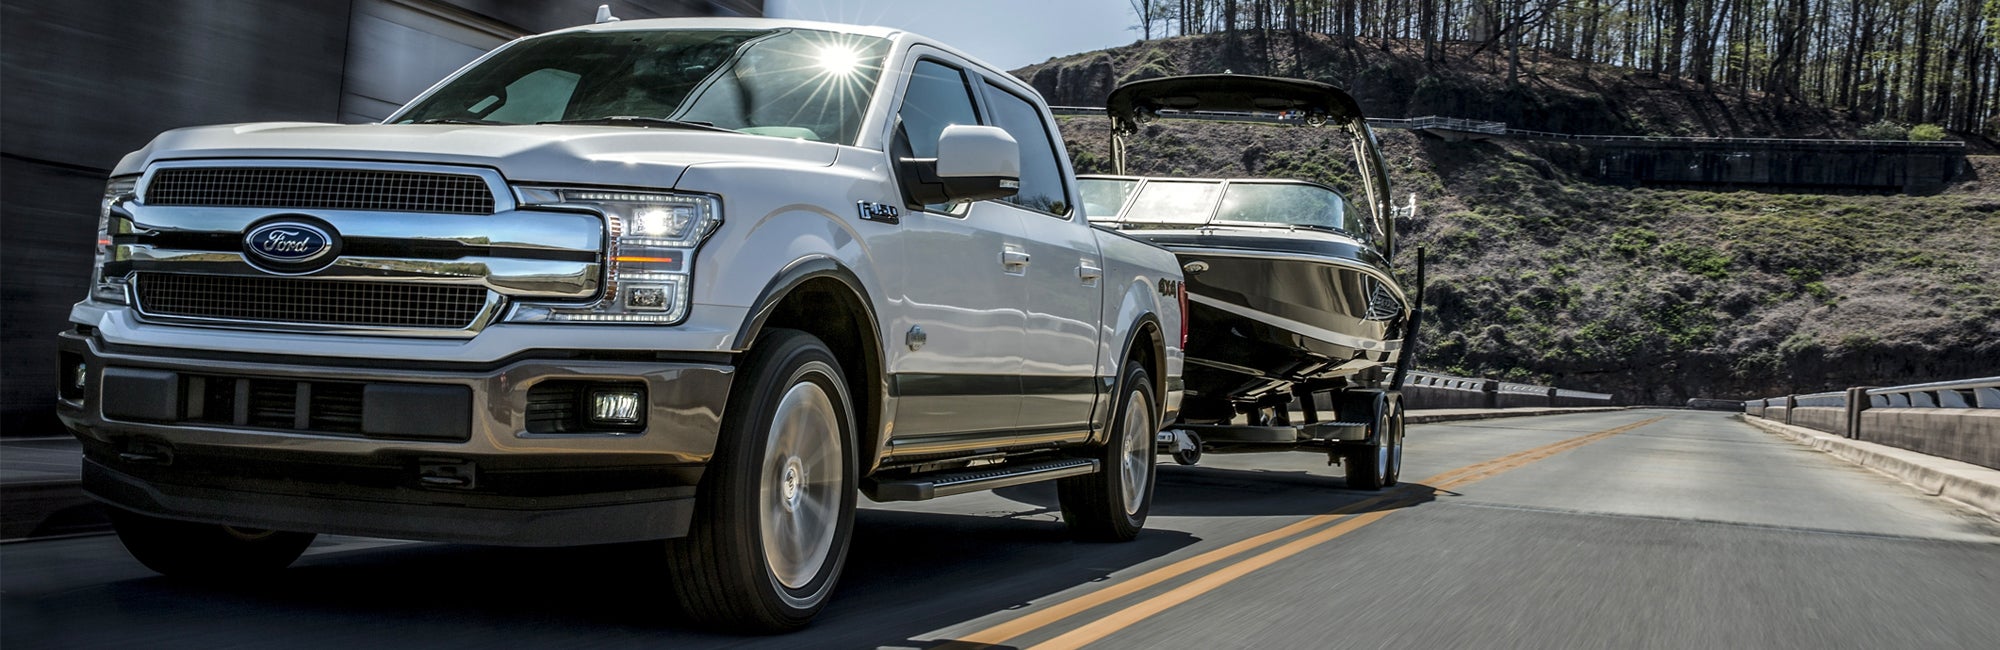 2020 Ford F-150 | Towing Capacity & More | Buss Ford 2020 Ford F 150 Diesel Towing Capacity